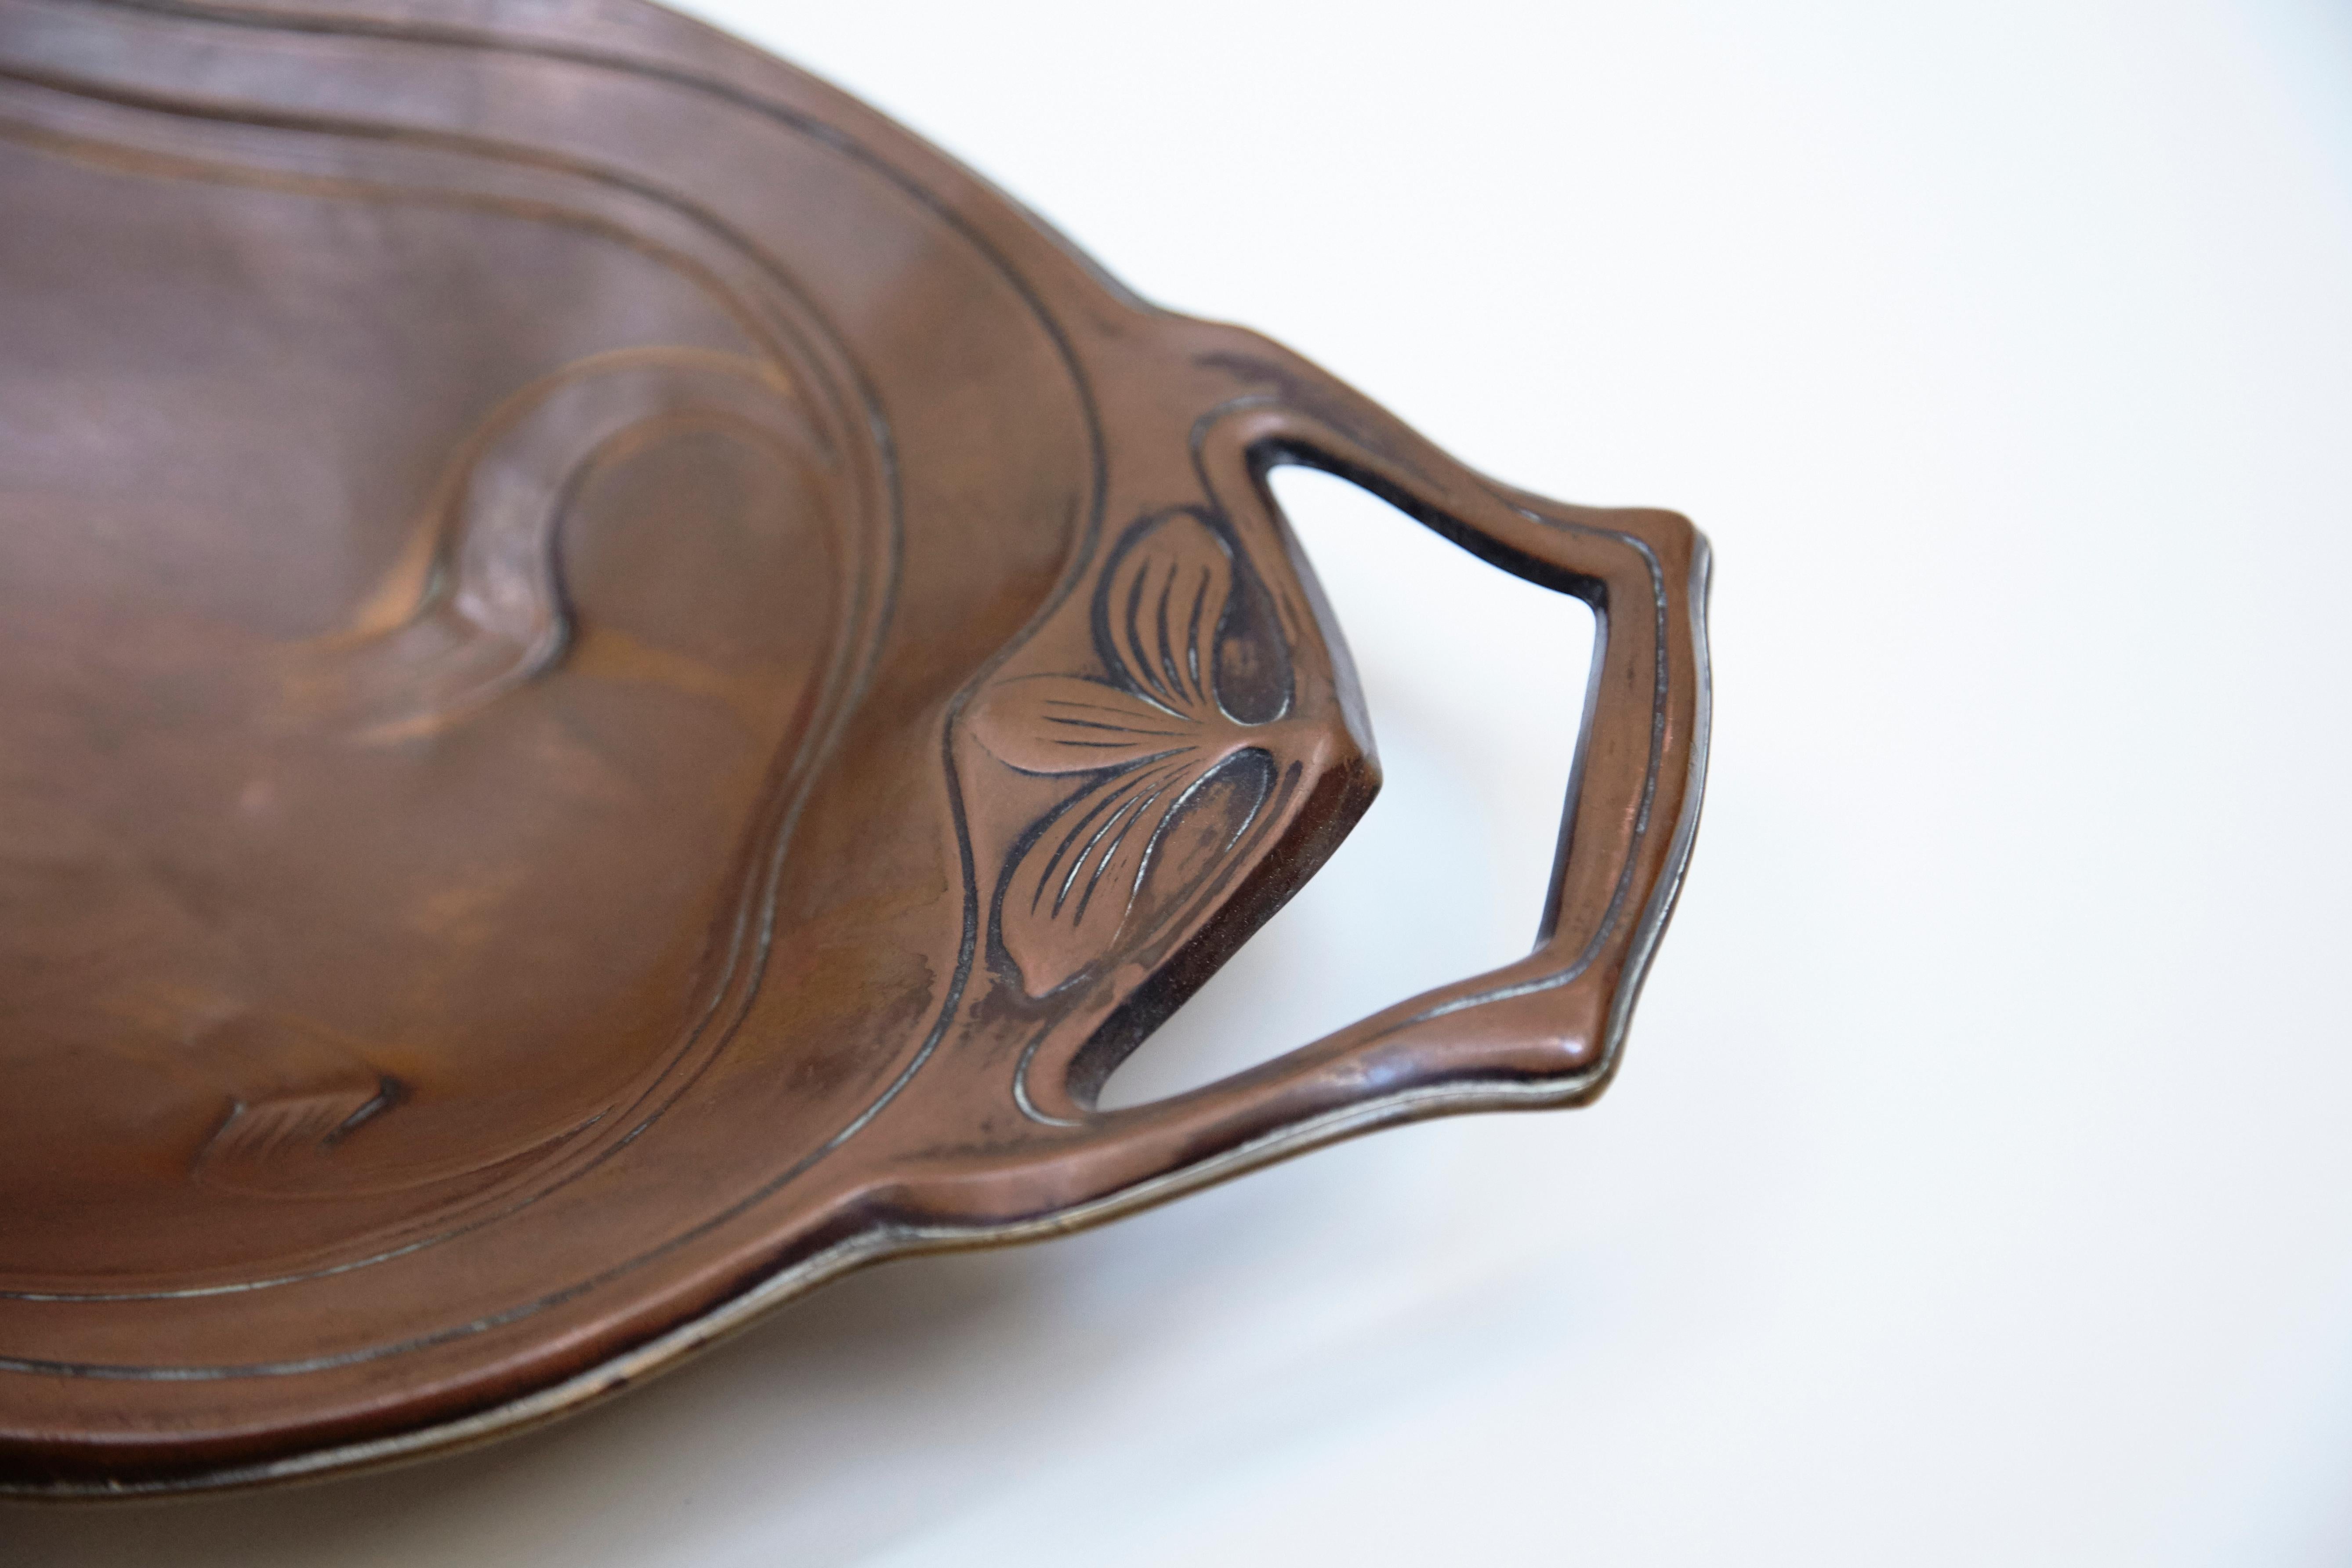 Early 20th Century Catalan Modernist Copper Tray from Barcelona, circa 1920